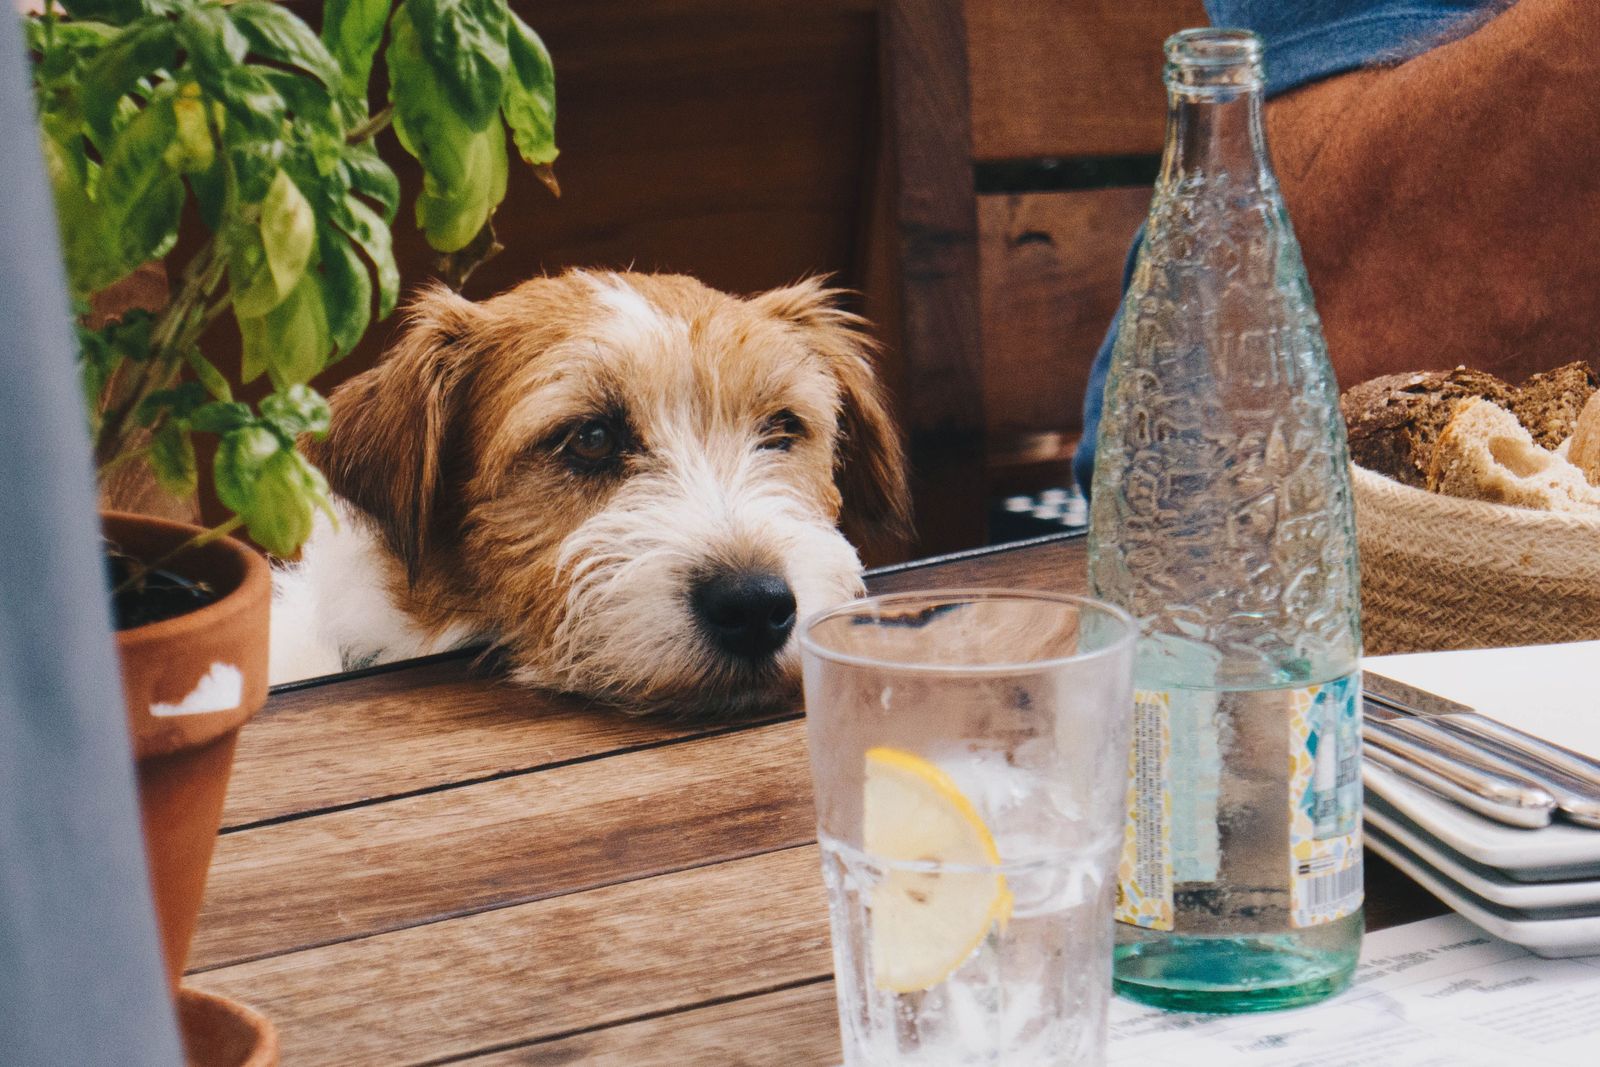 How safe is the water your pet is drinking? - Jack Russell Terrier looking over table